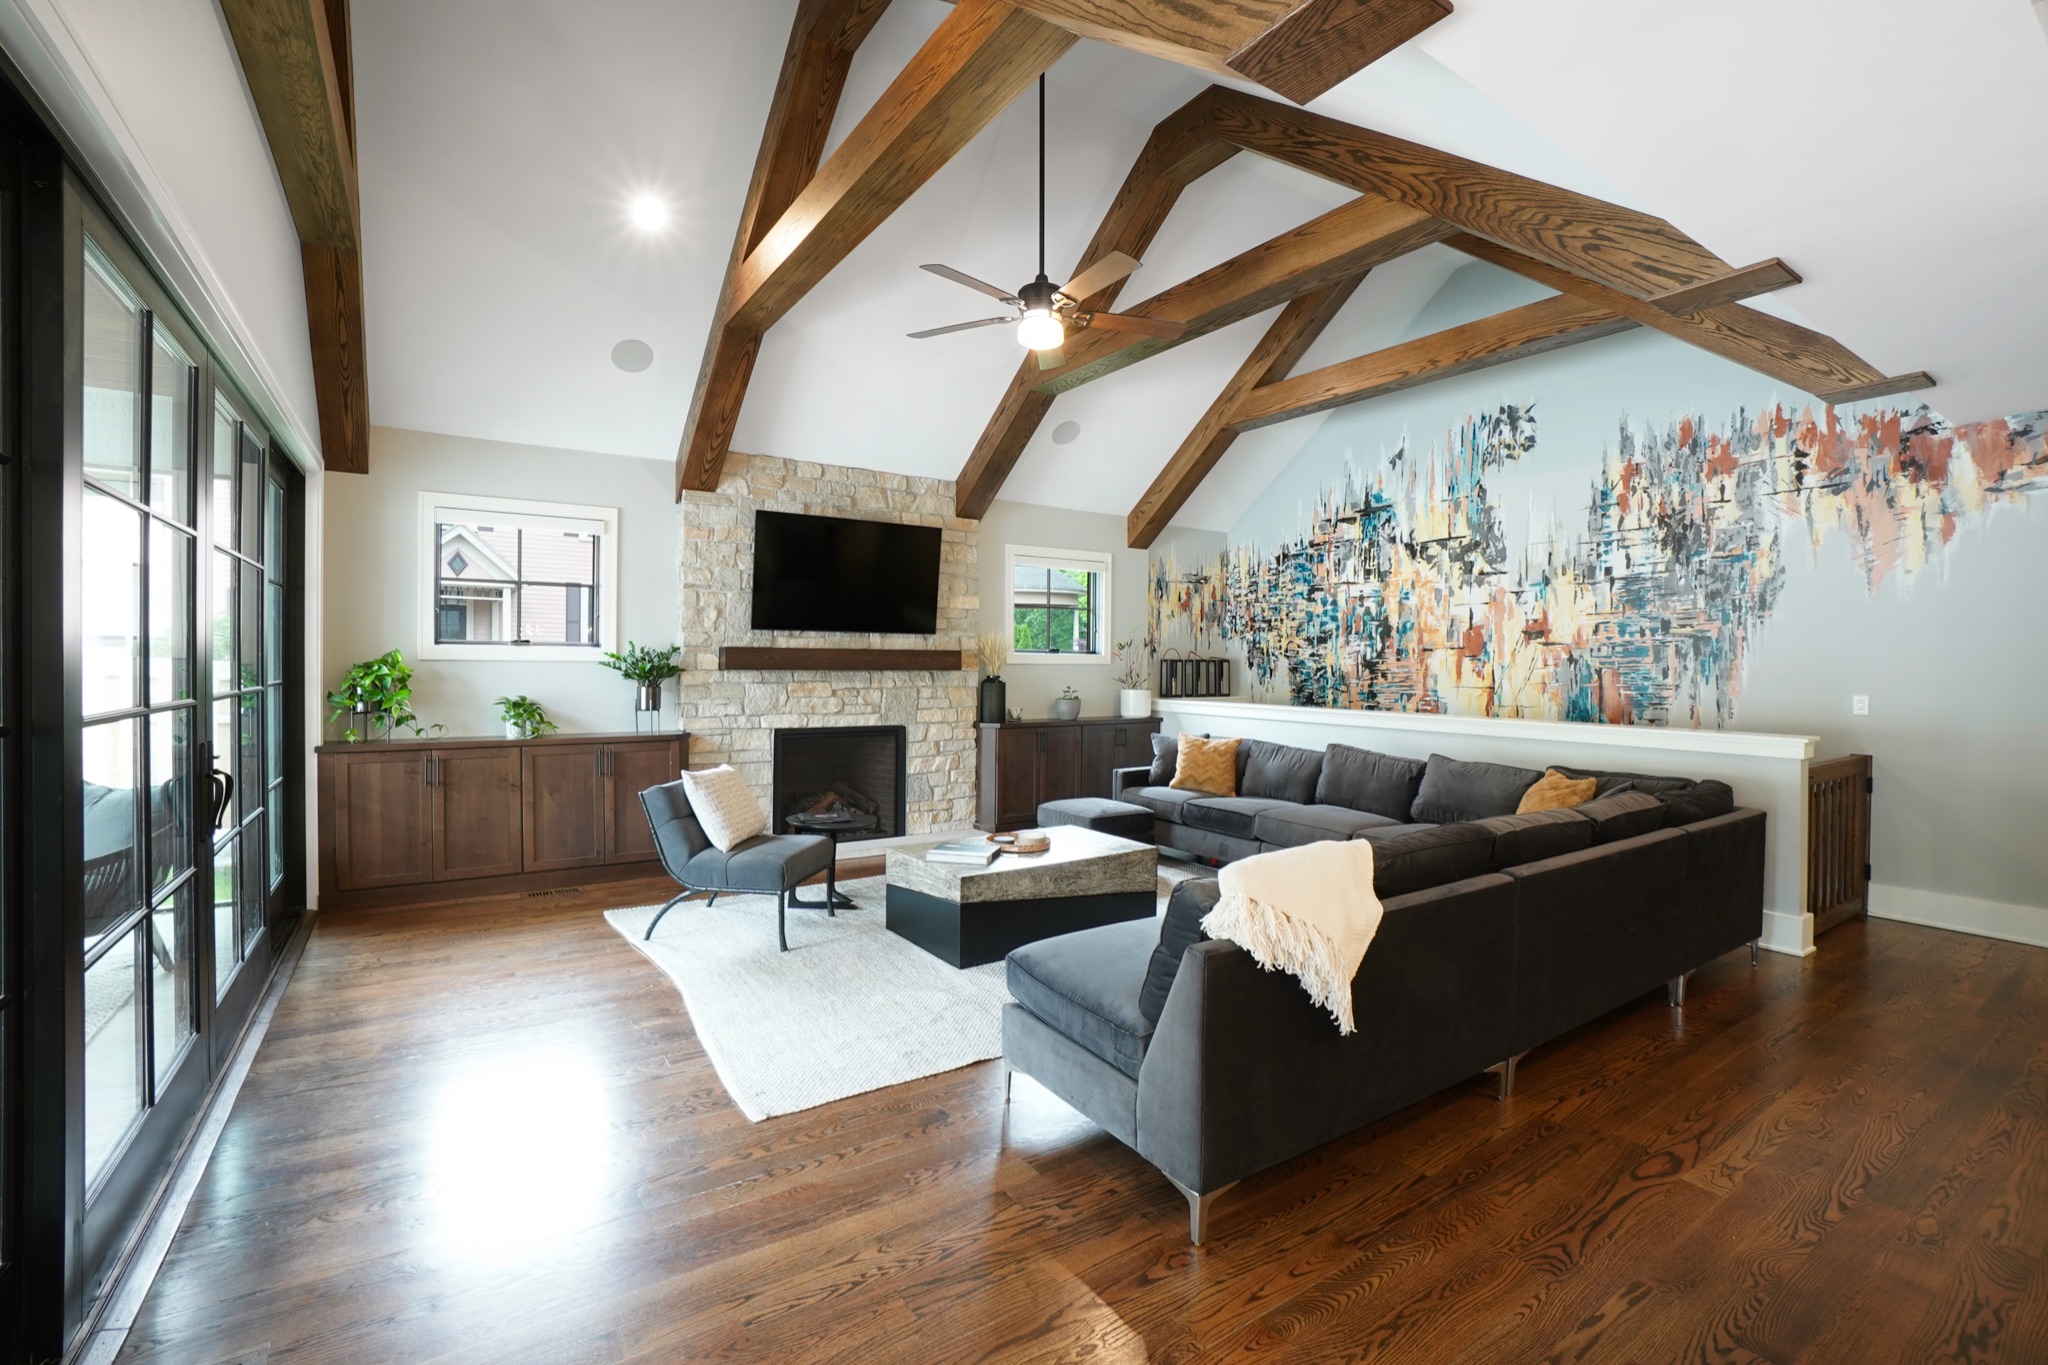 Living room with wood beam vaulted ceilings, stone fireplace and built-in cabinetry. Featuring a painted mural.